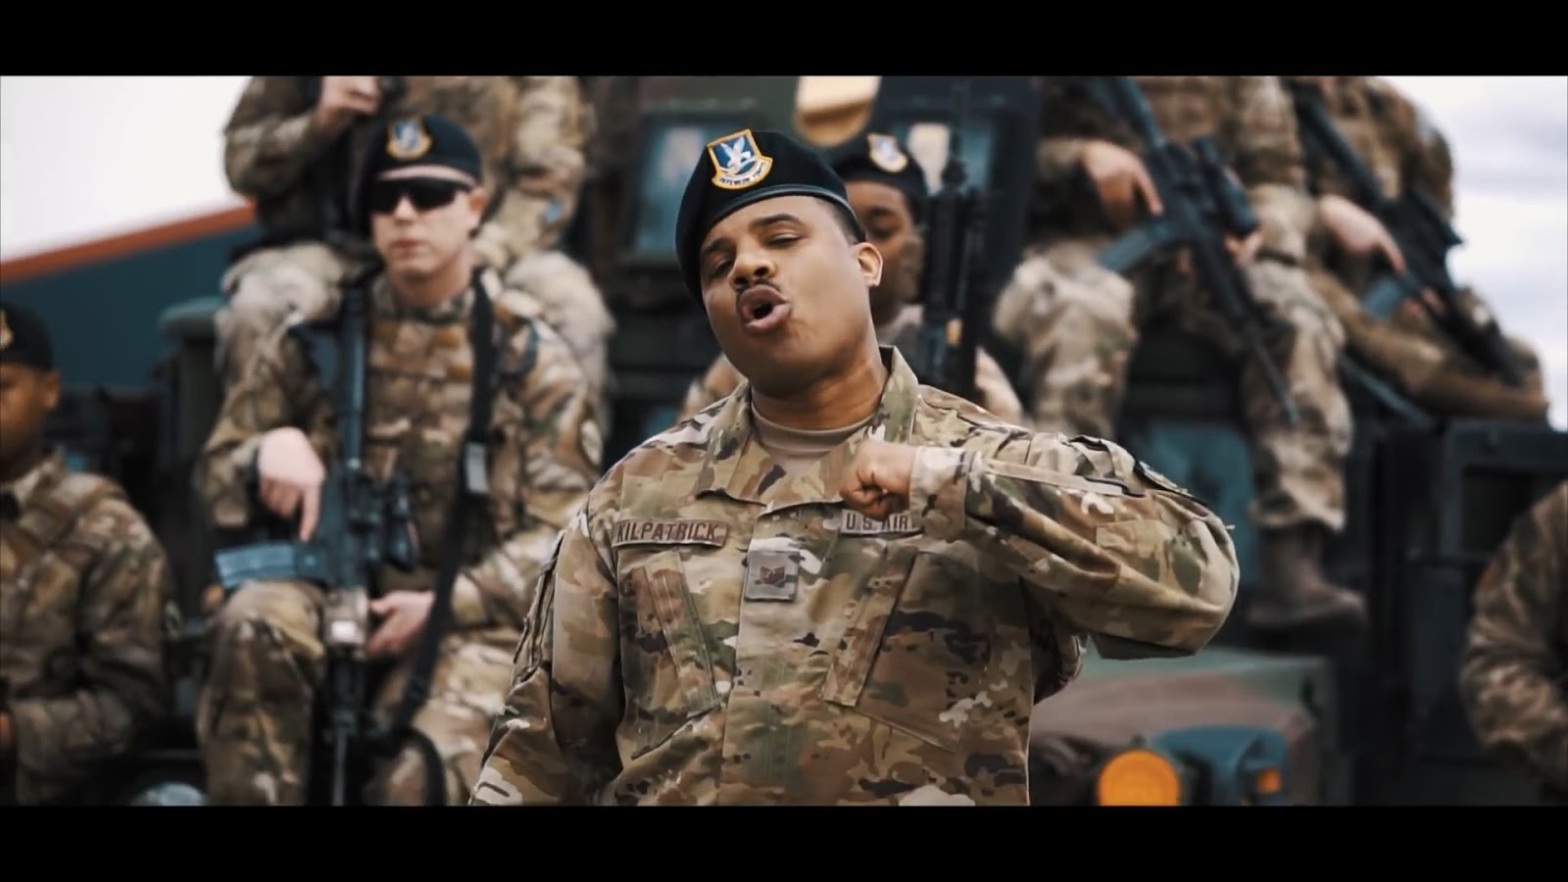 Security Forces - Get In Step (Cena do clipe)